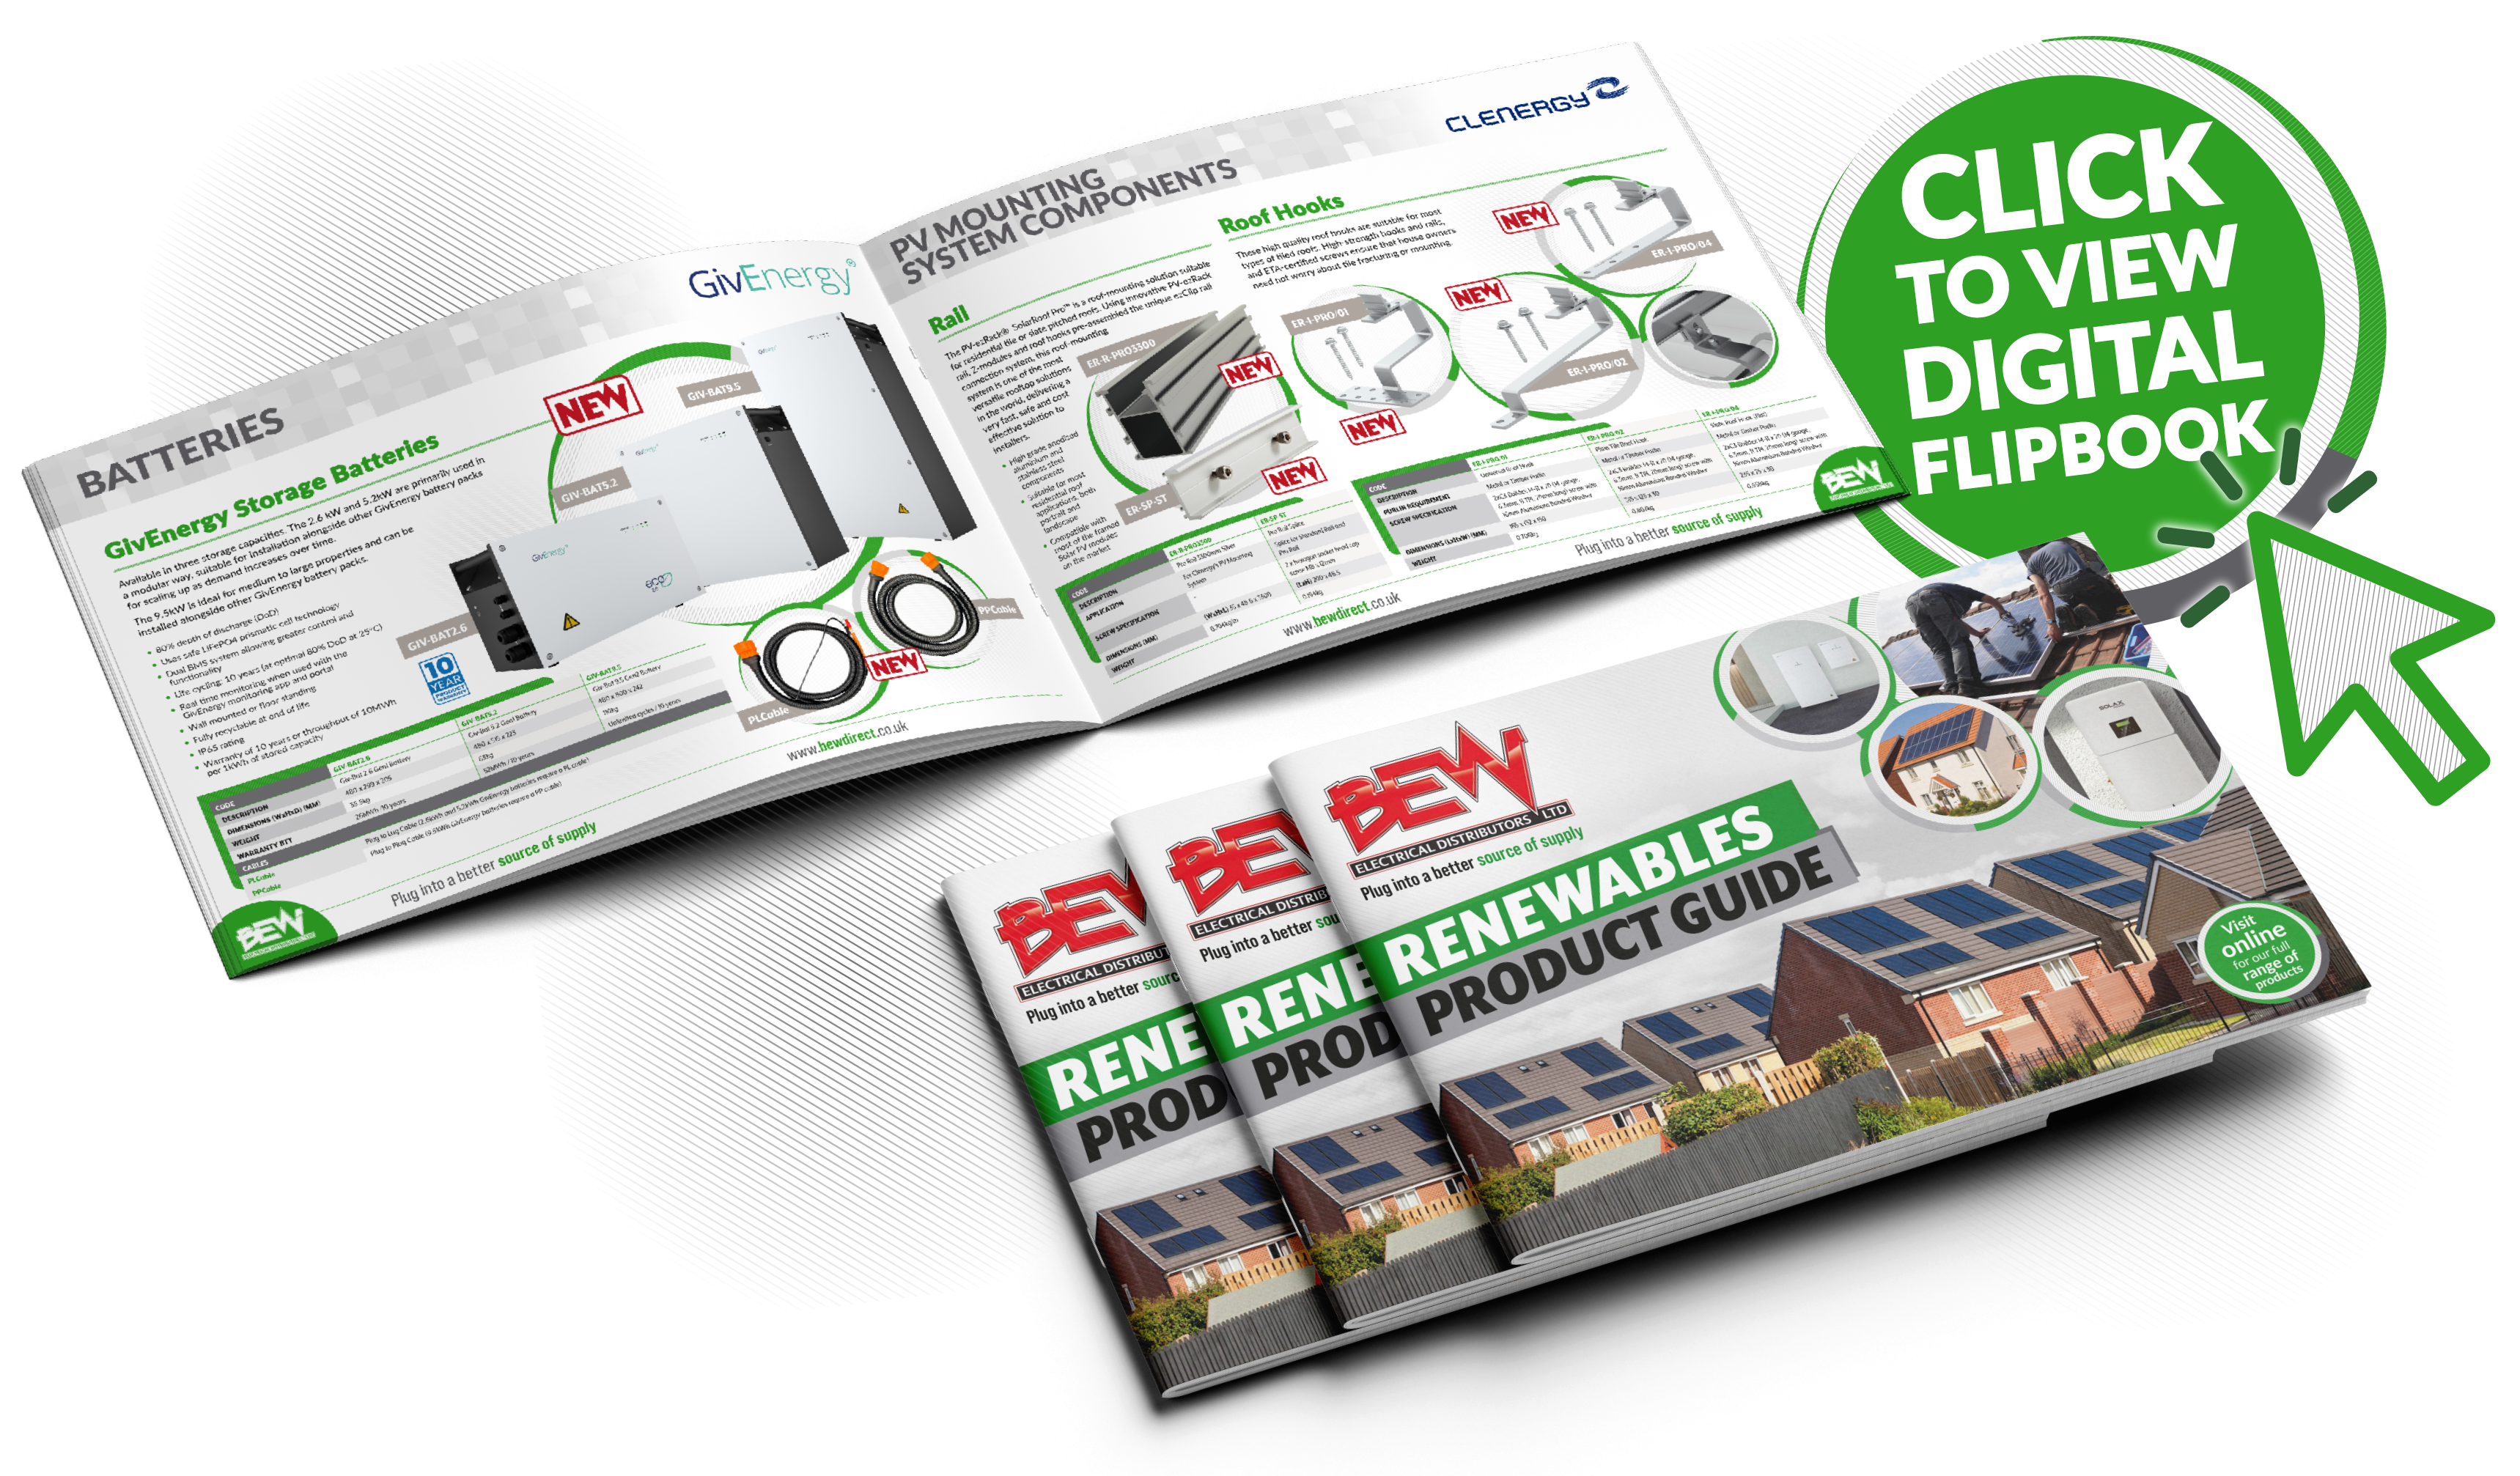 BEW Renewables Product Guide by NG15